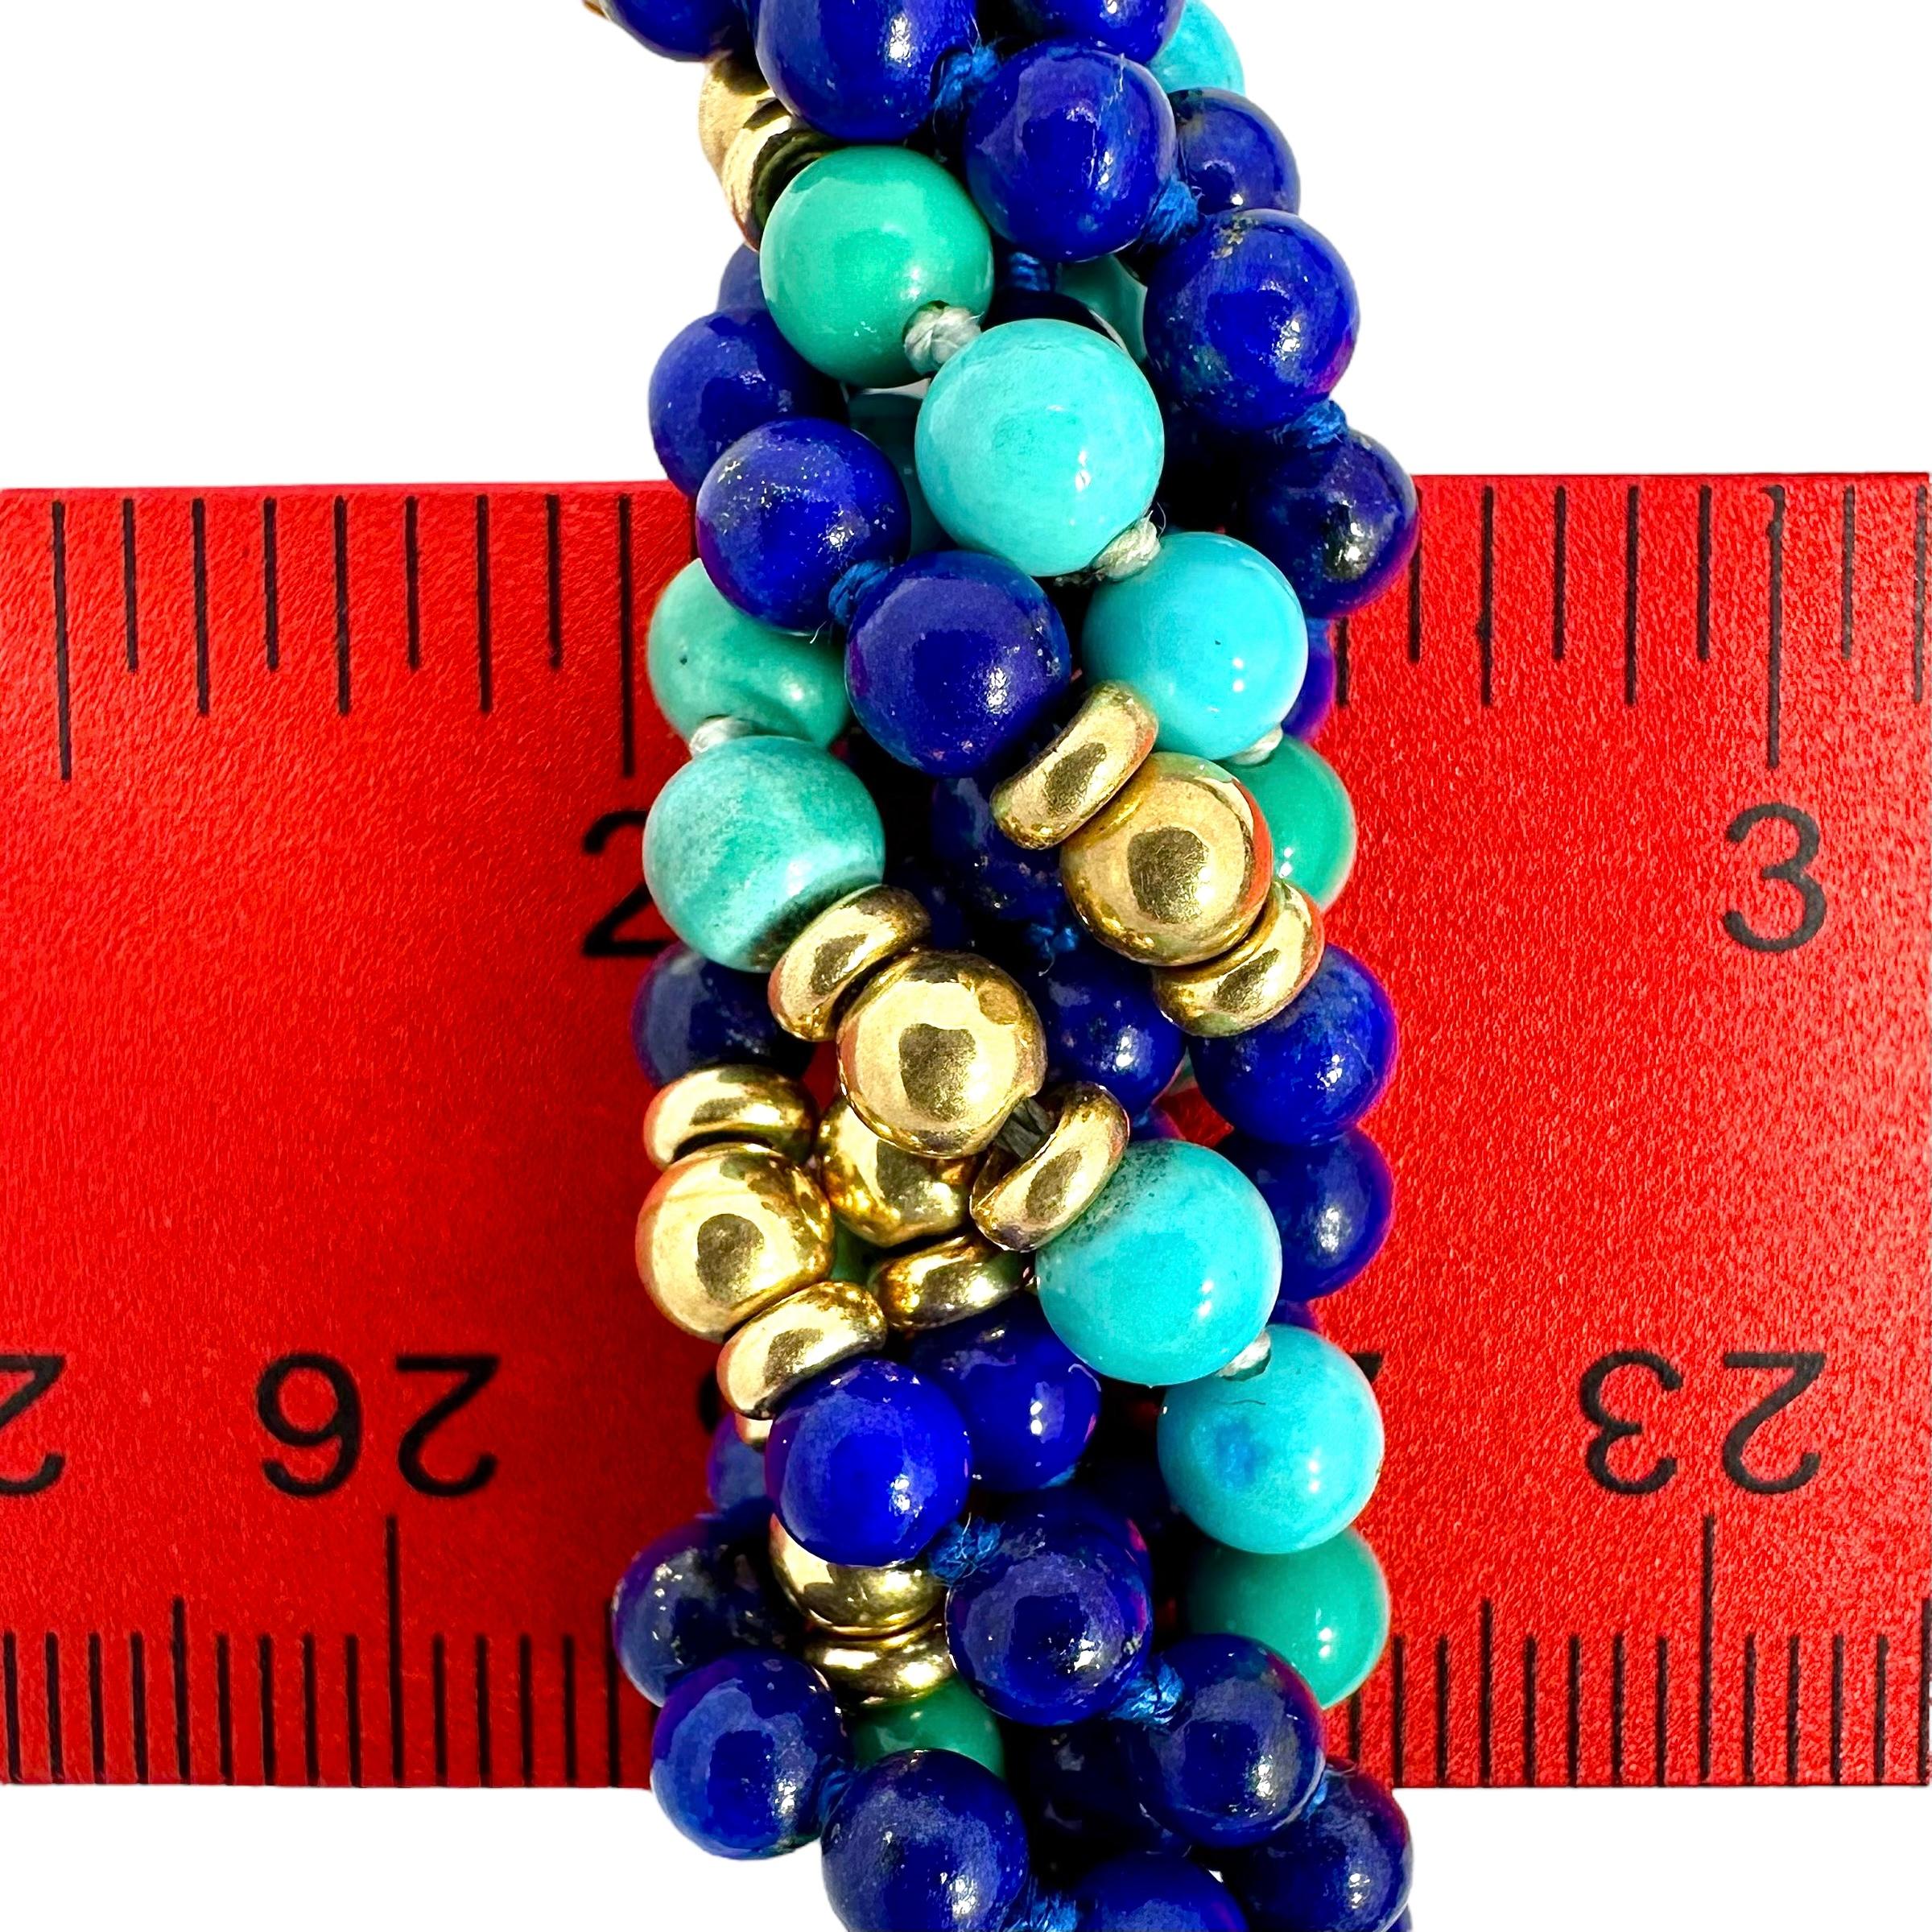 Women's Classic Mid-20th Century Torsade Choker with Lapis, Turquoise and Gold Beads For Sale